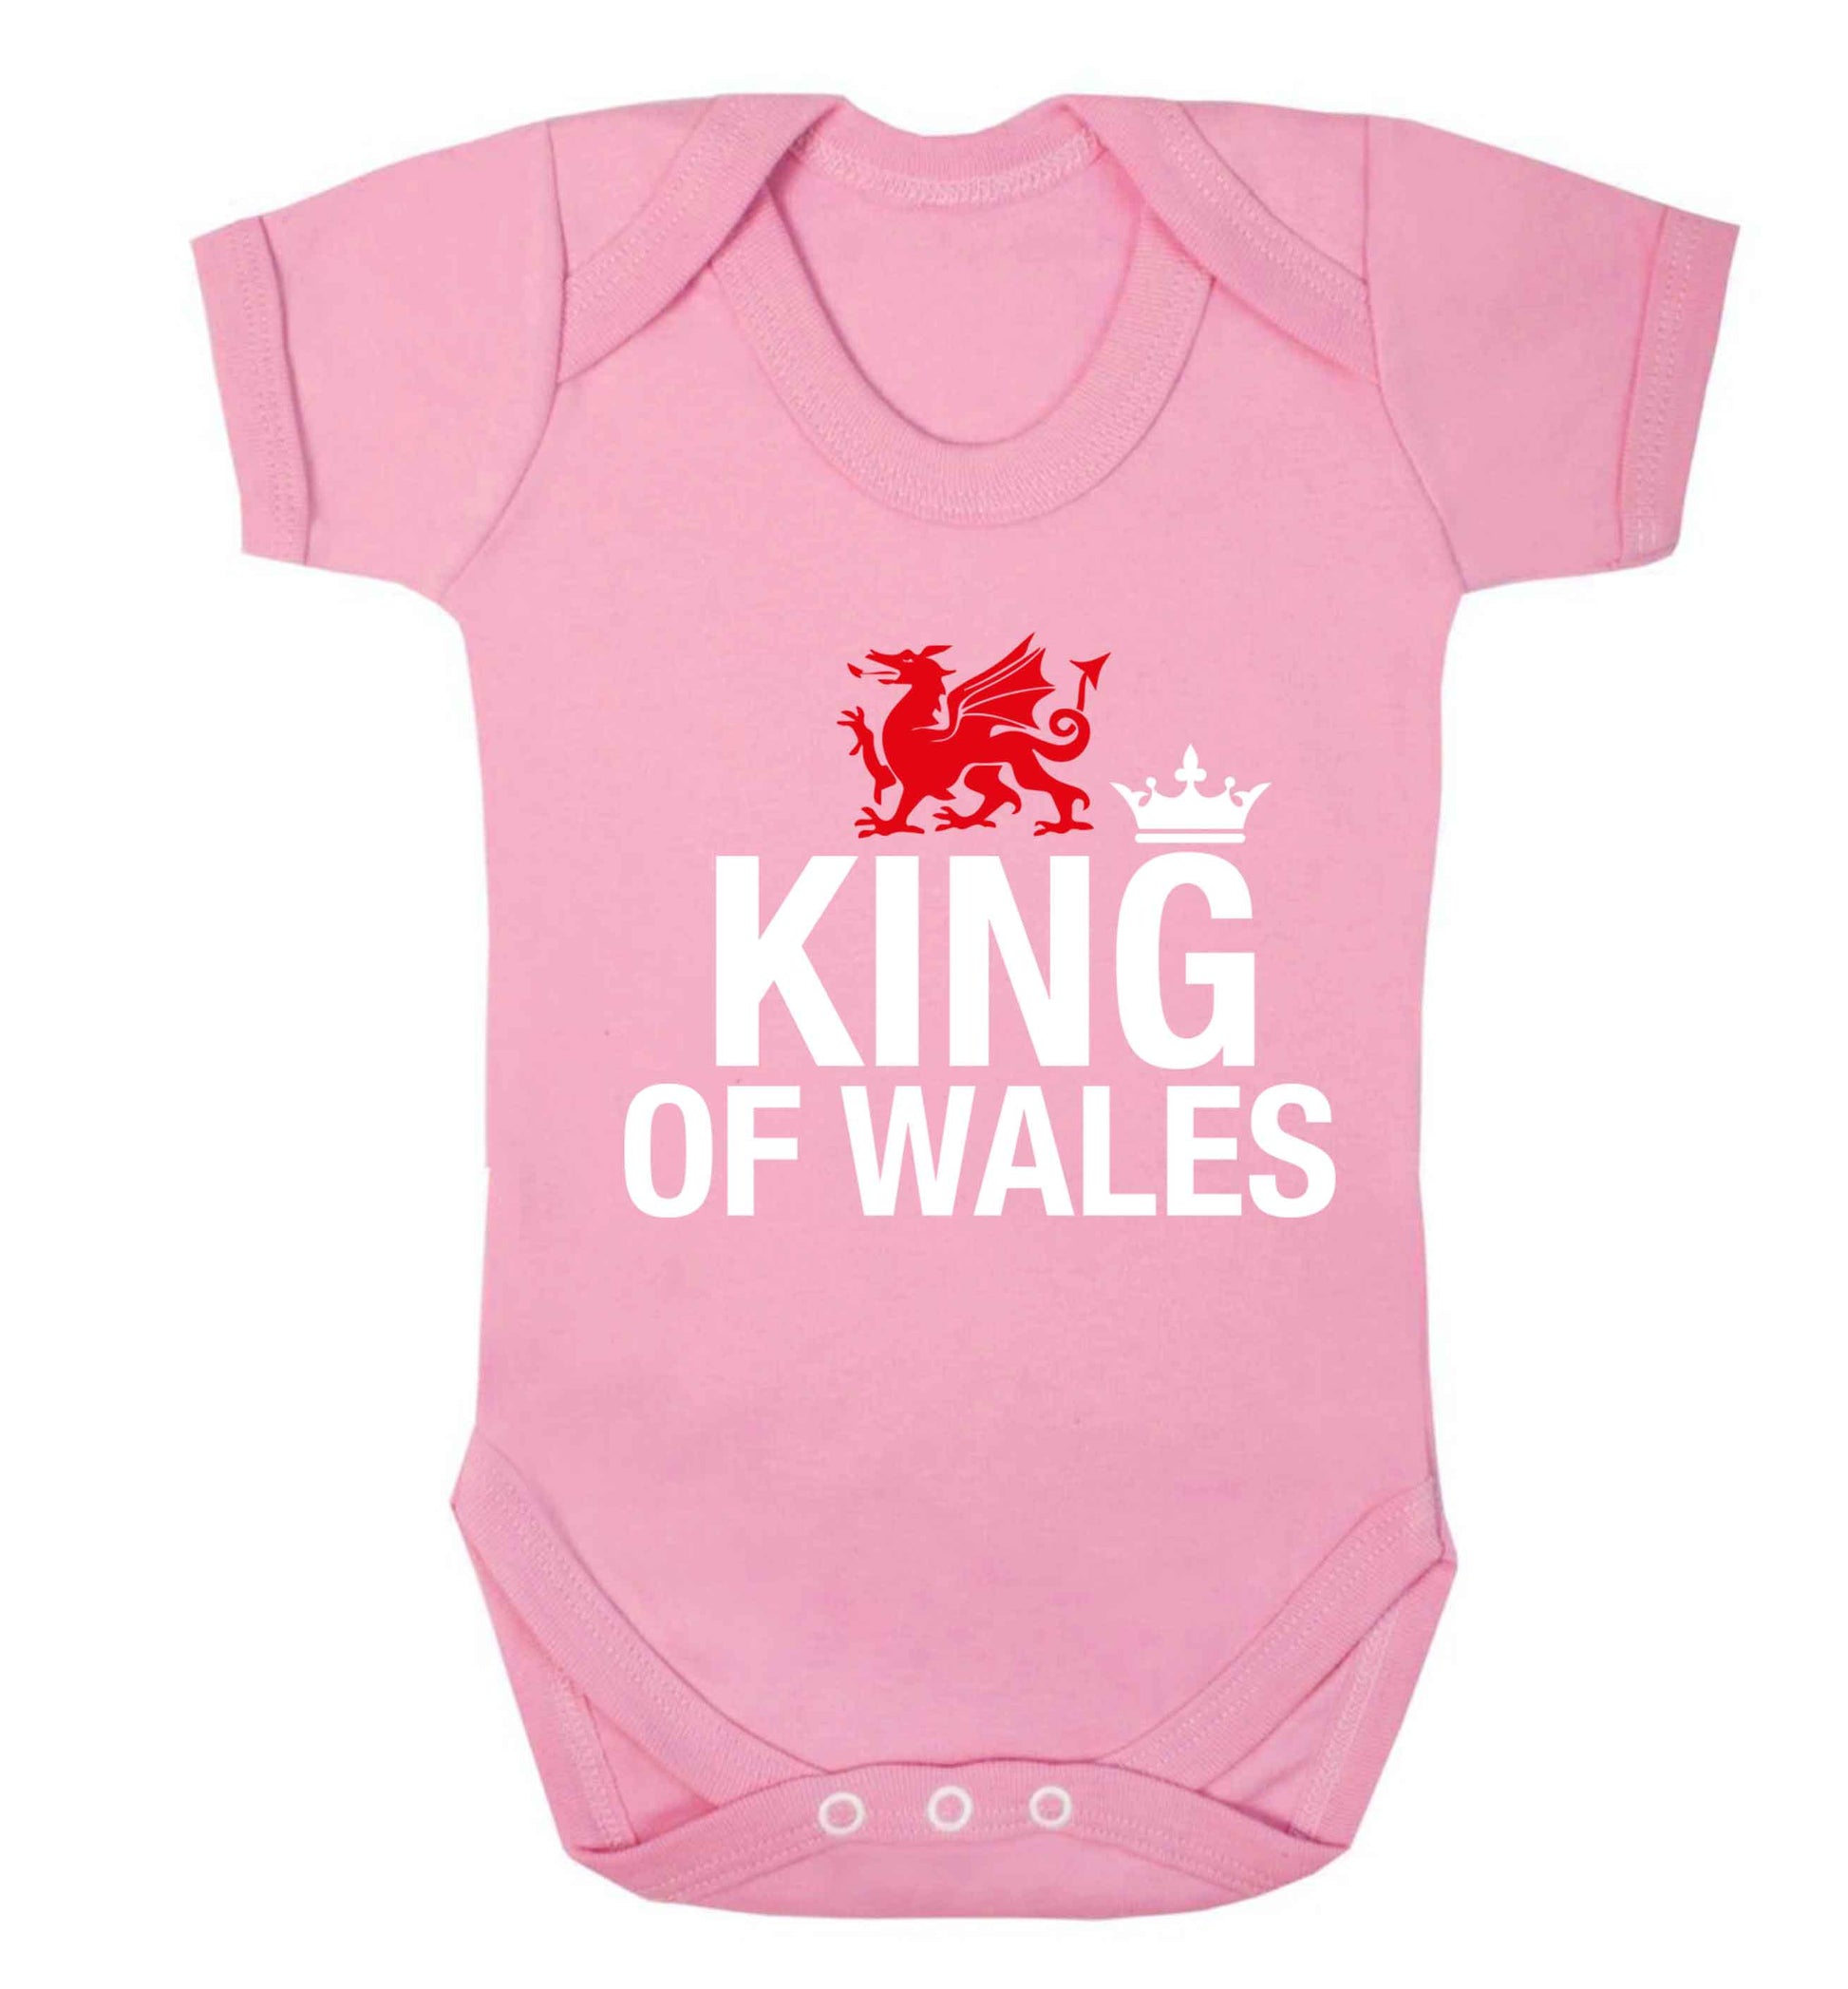 King of Wales Baby Vest pale pink 18-24 months